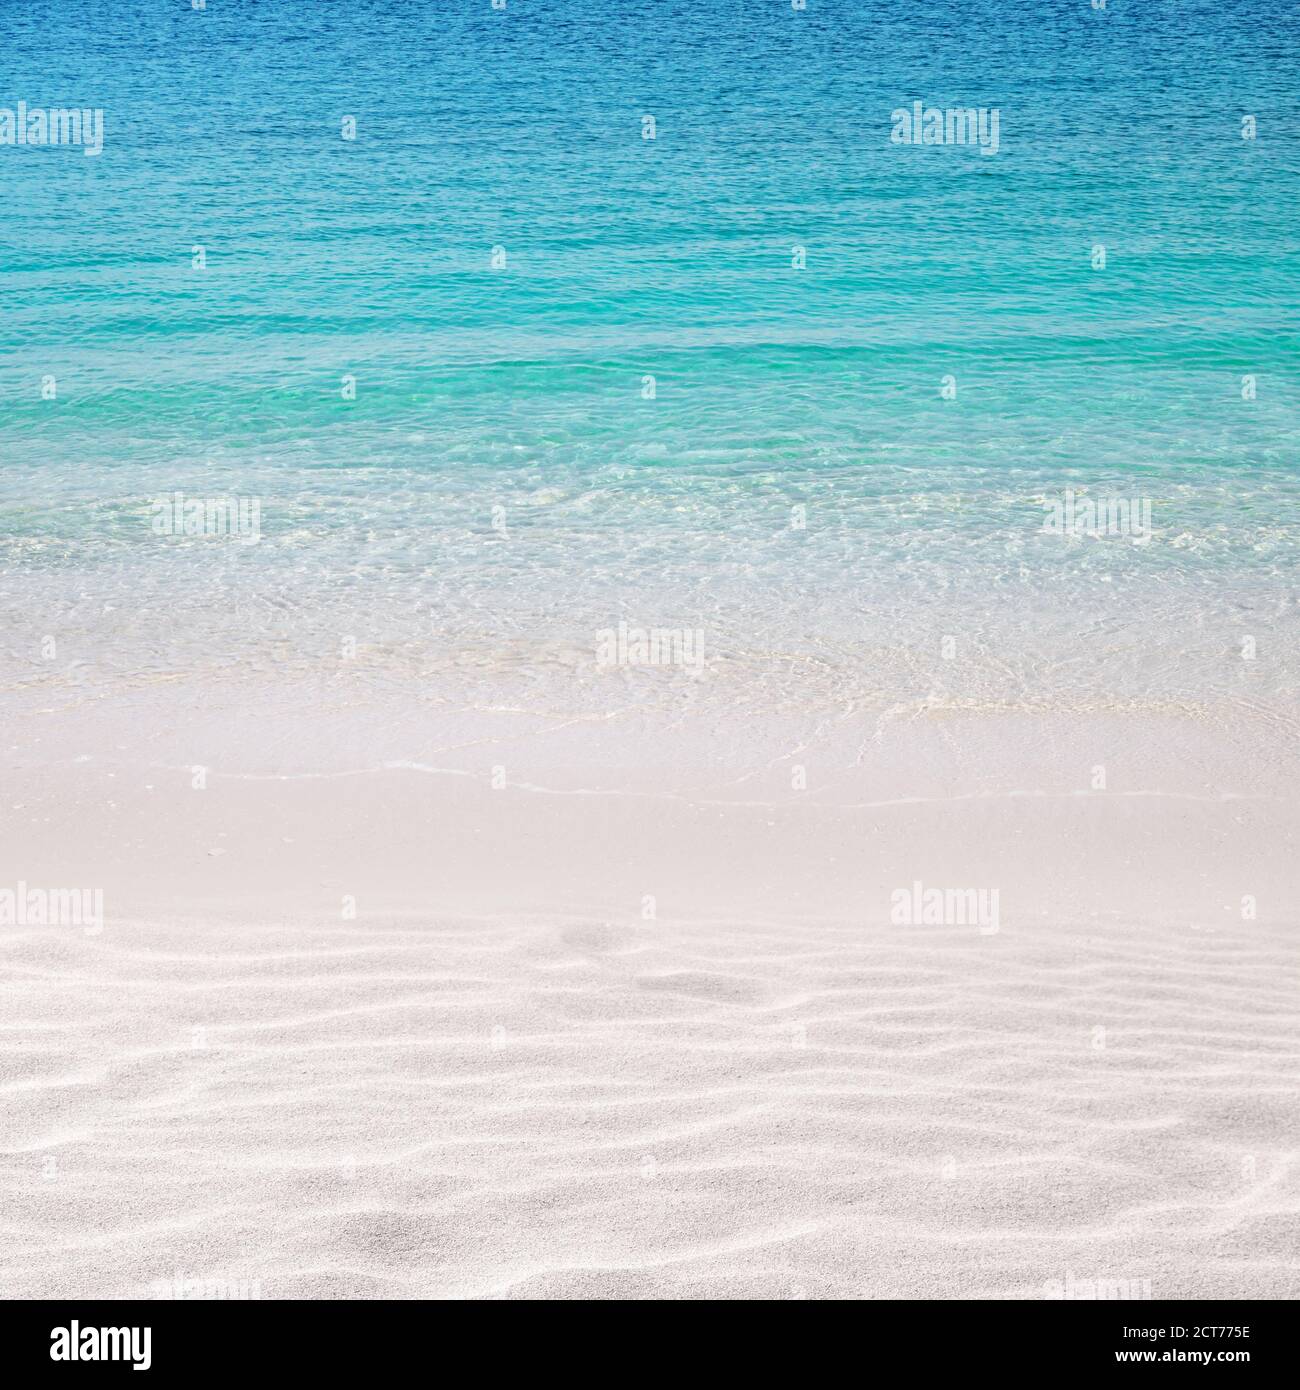 White sandy beach background. Crystal clear turquoise sea. Summer paradise. Wind waves. Stock Photo